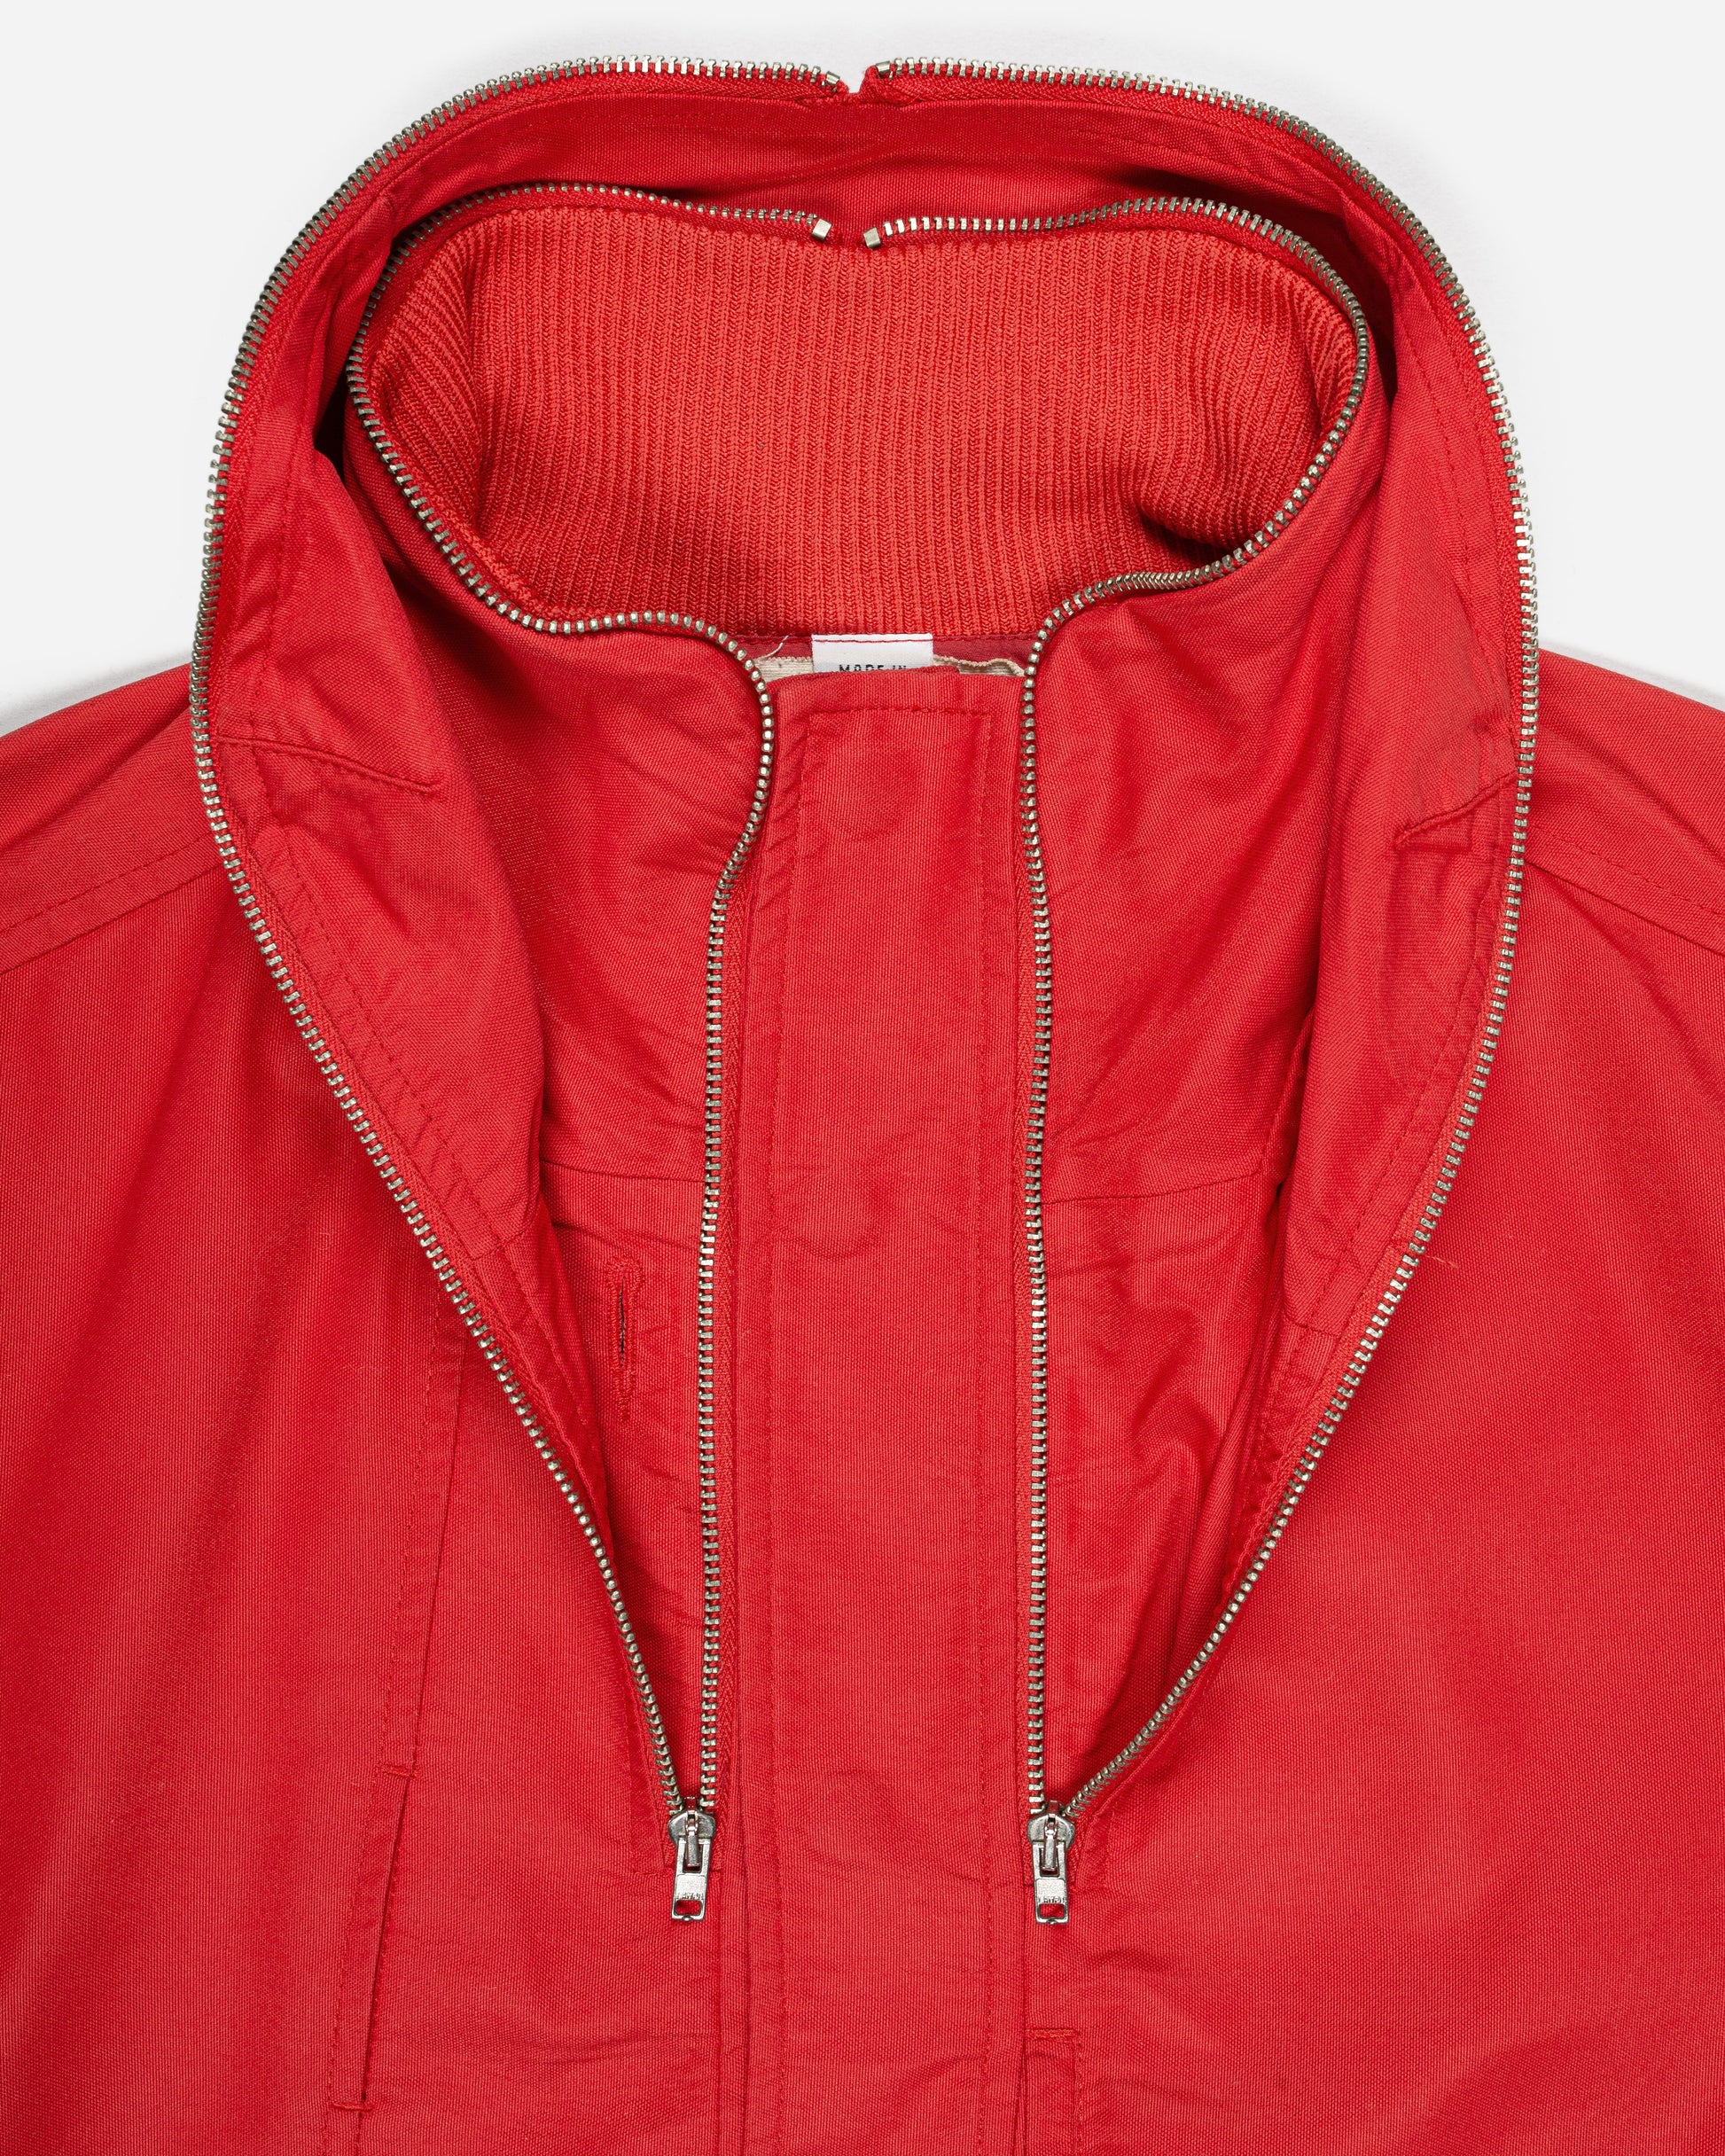 Silverwing Red Jacket XL